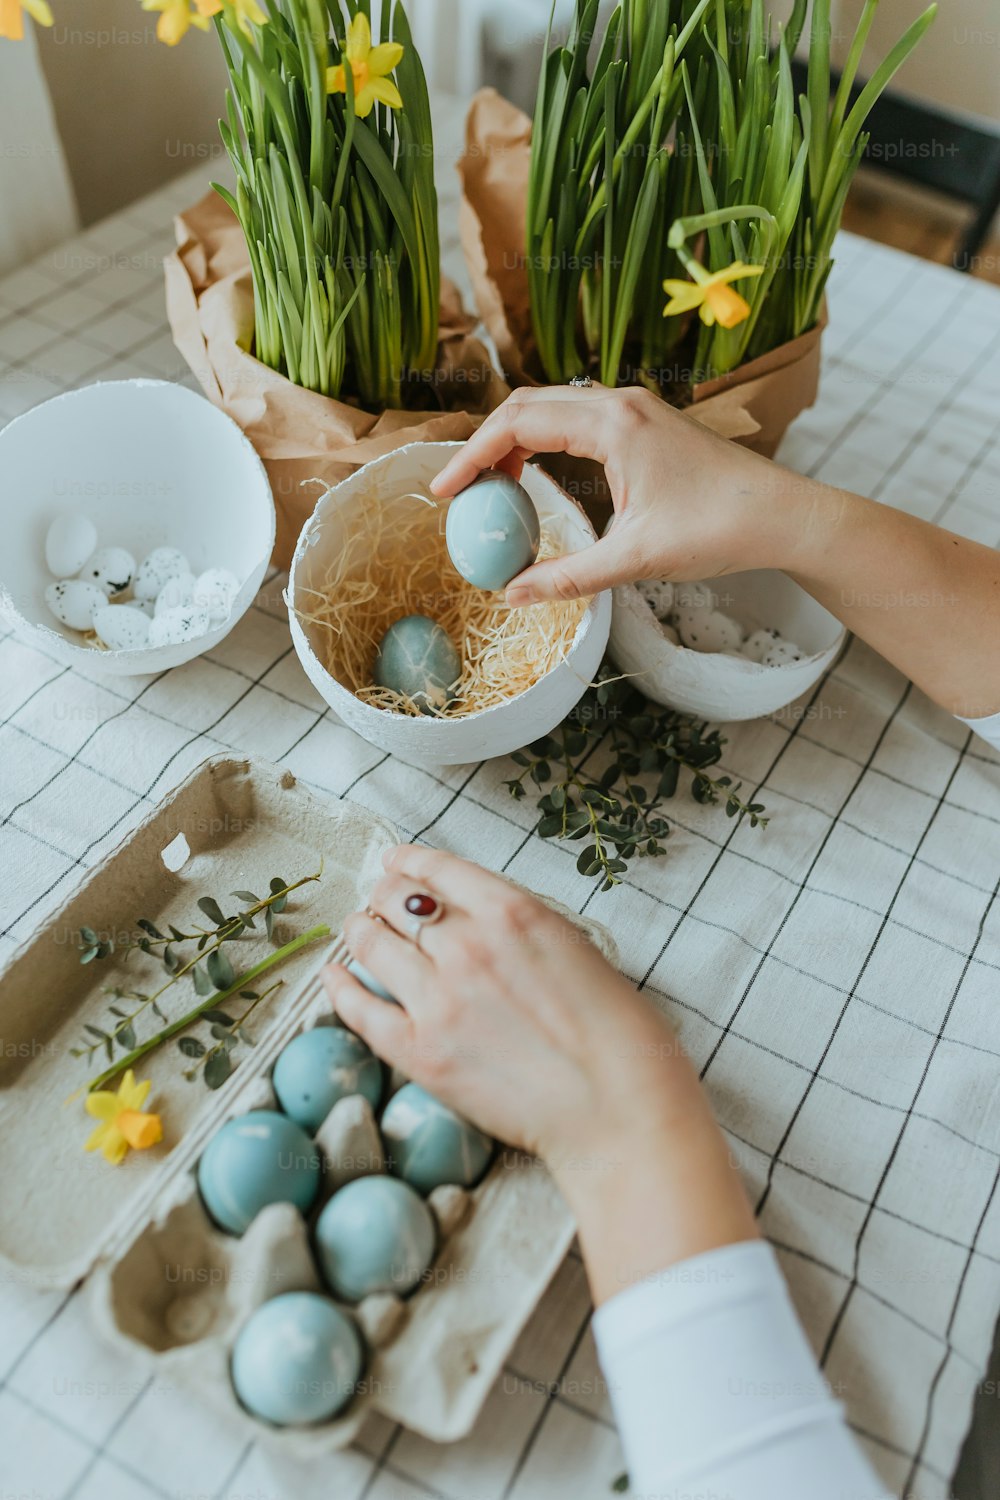 a woman is putting eggs in a bowl on a table